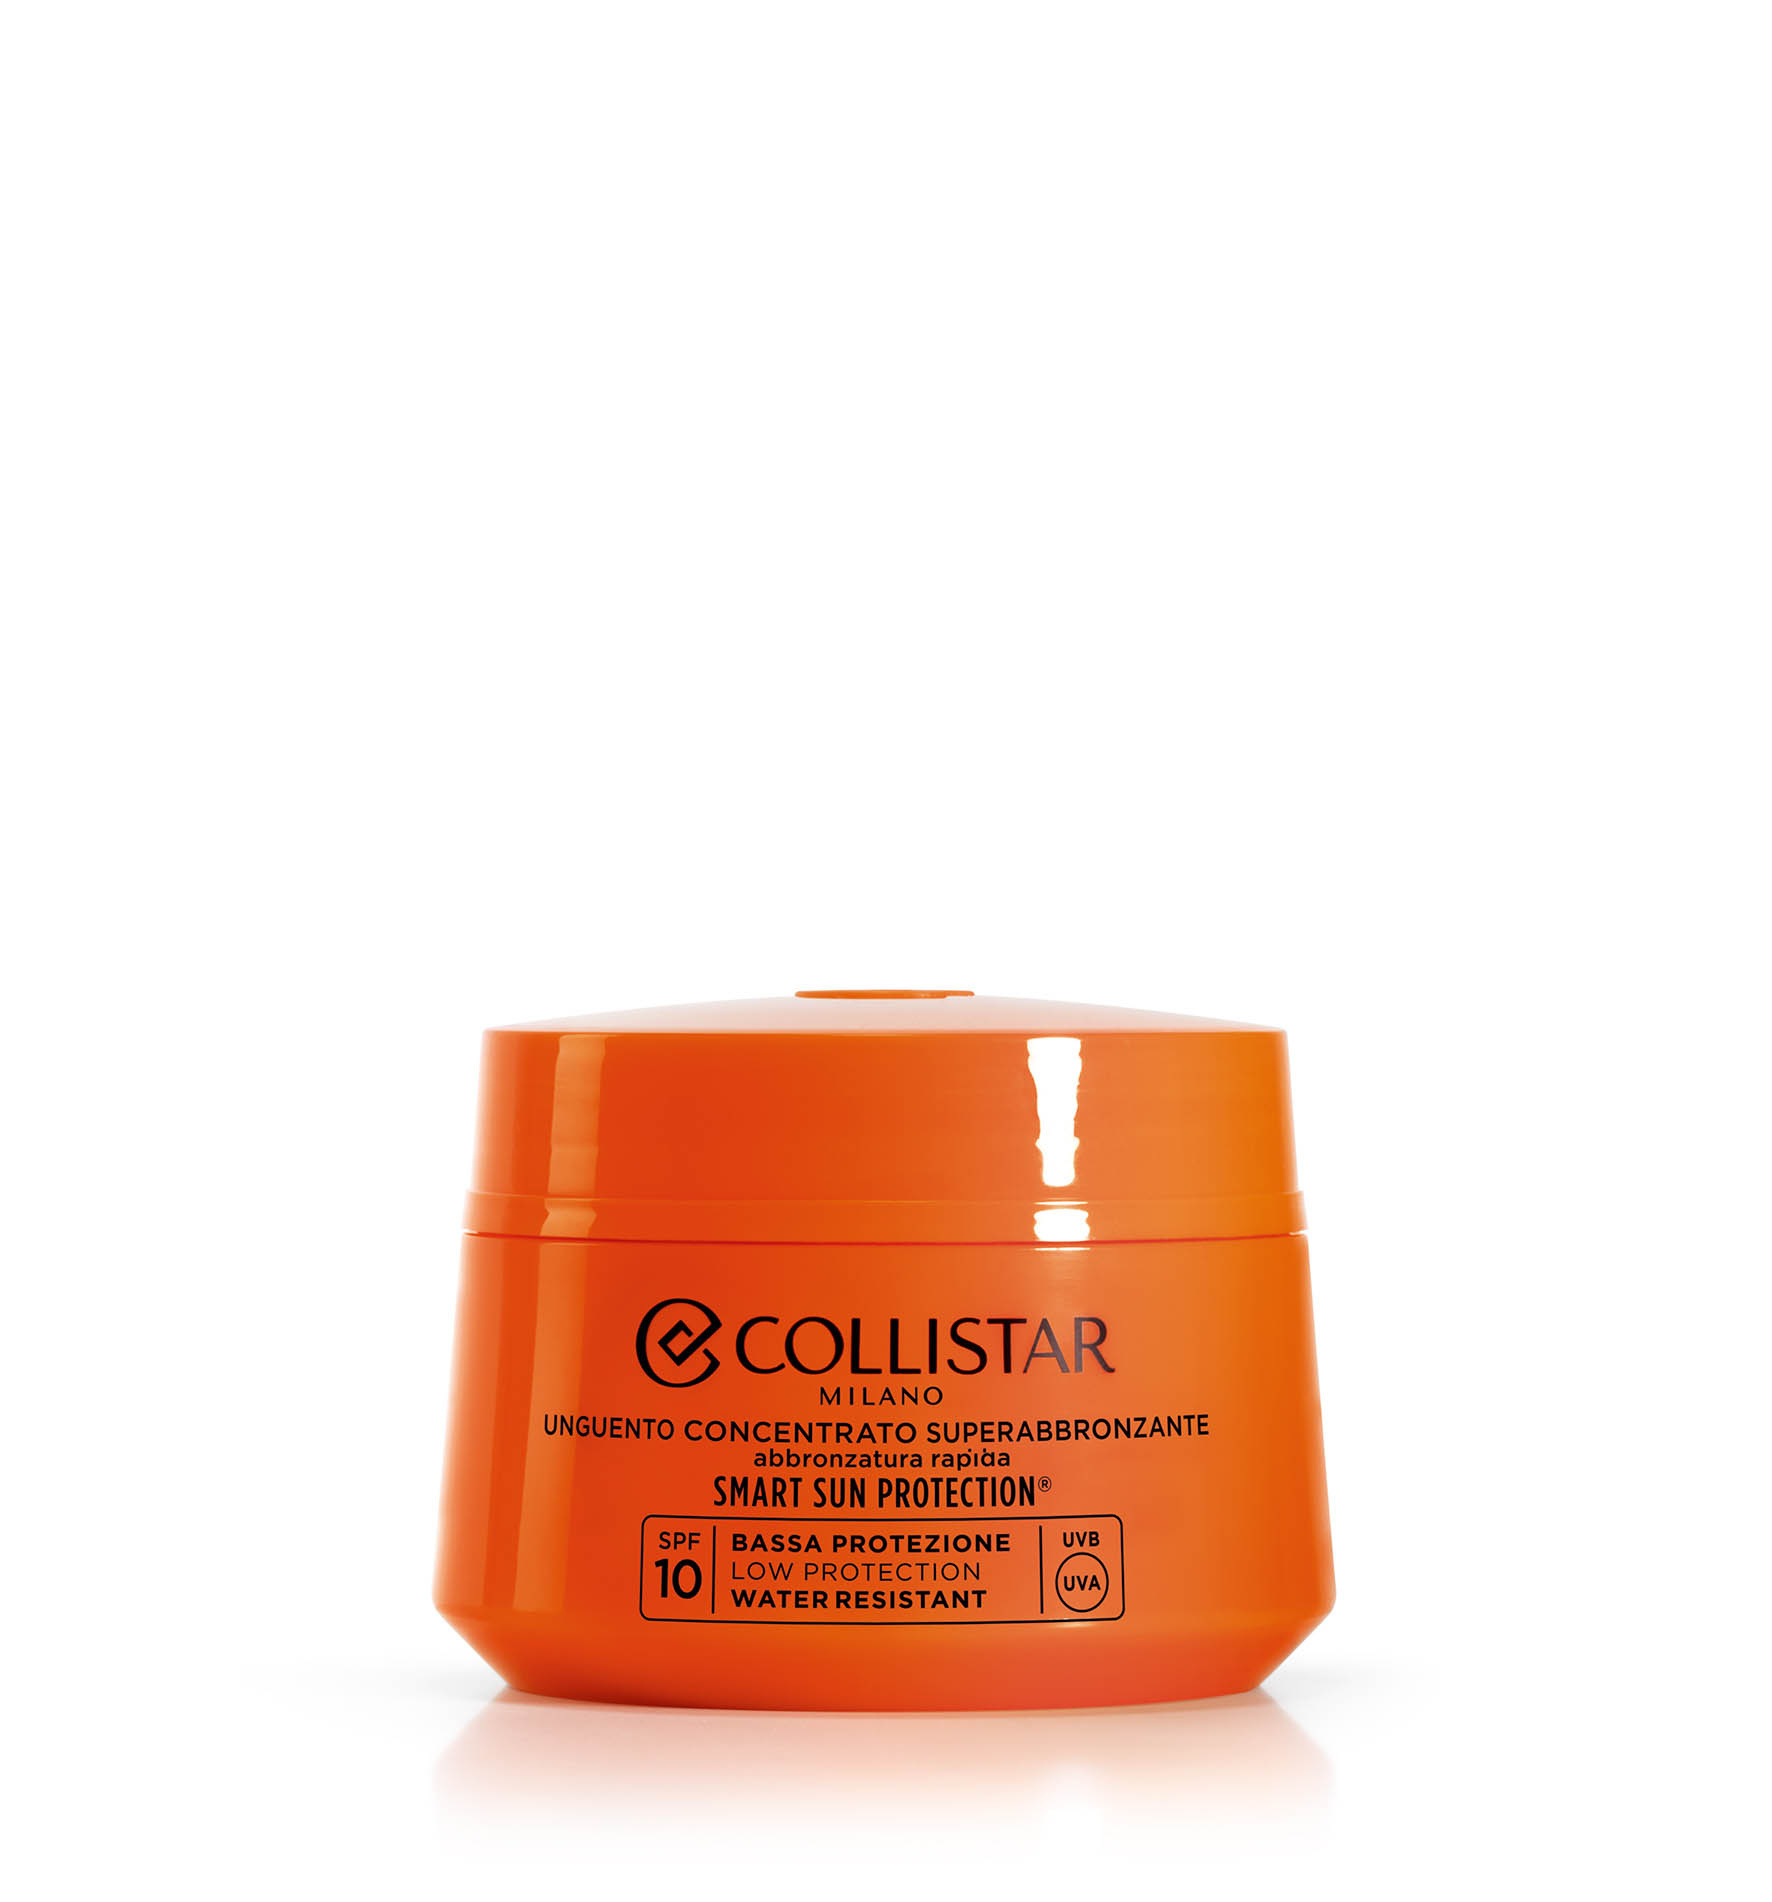 SUPERTANNING CONCENTRATED UNGUENT SPF 10 - New | Collistar - Shop Online Ufficiale